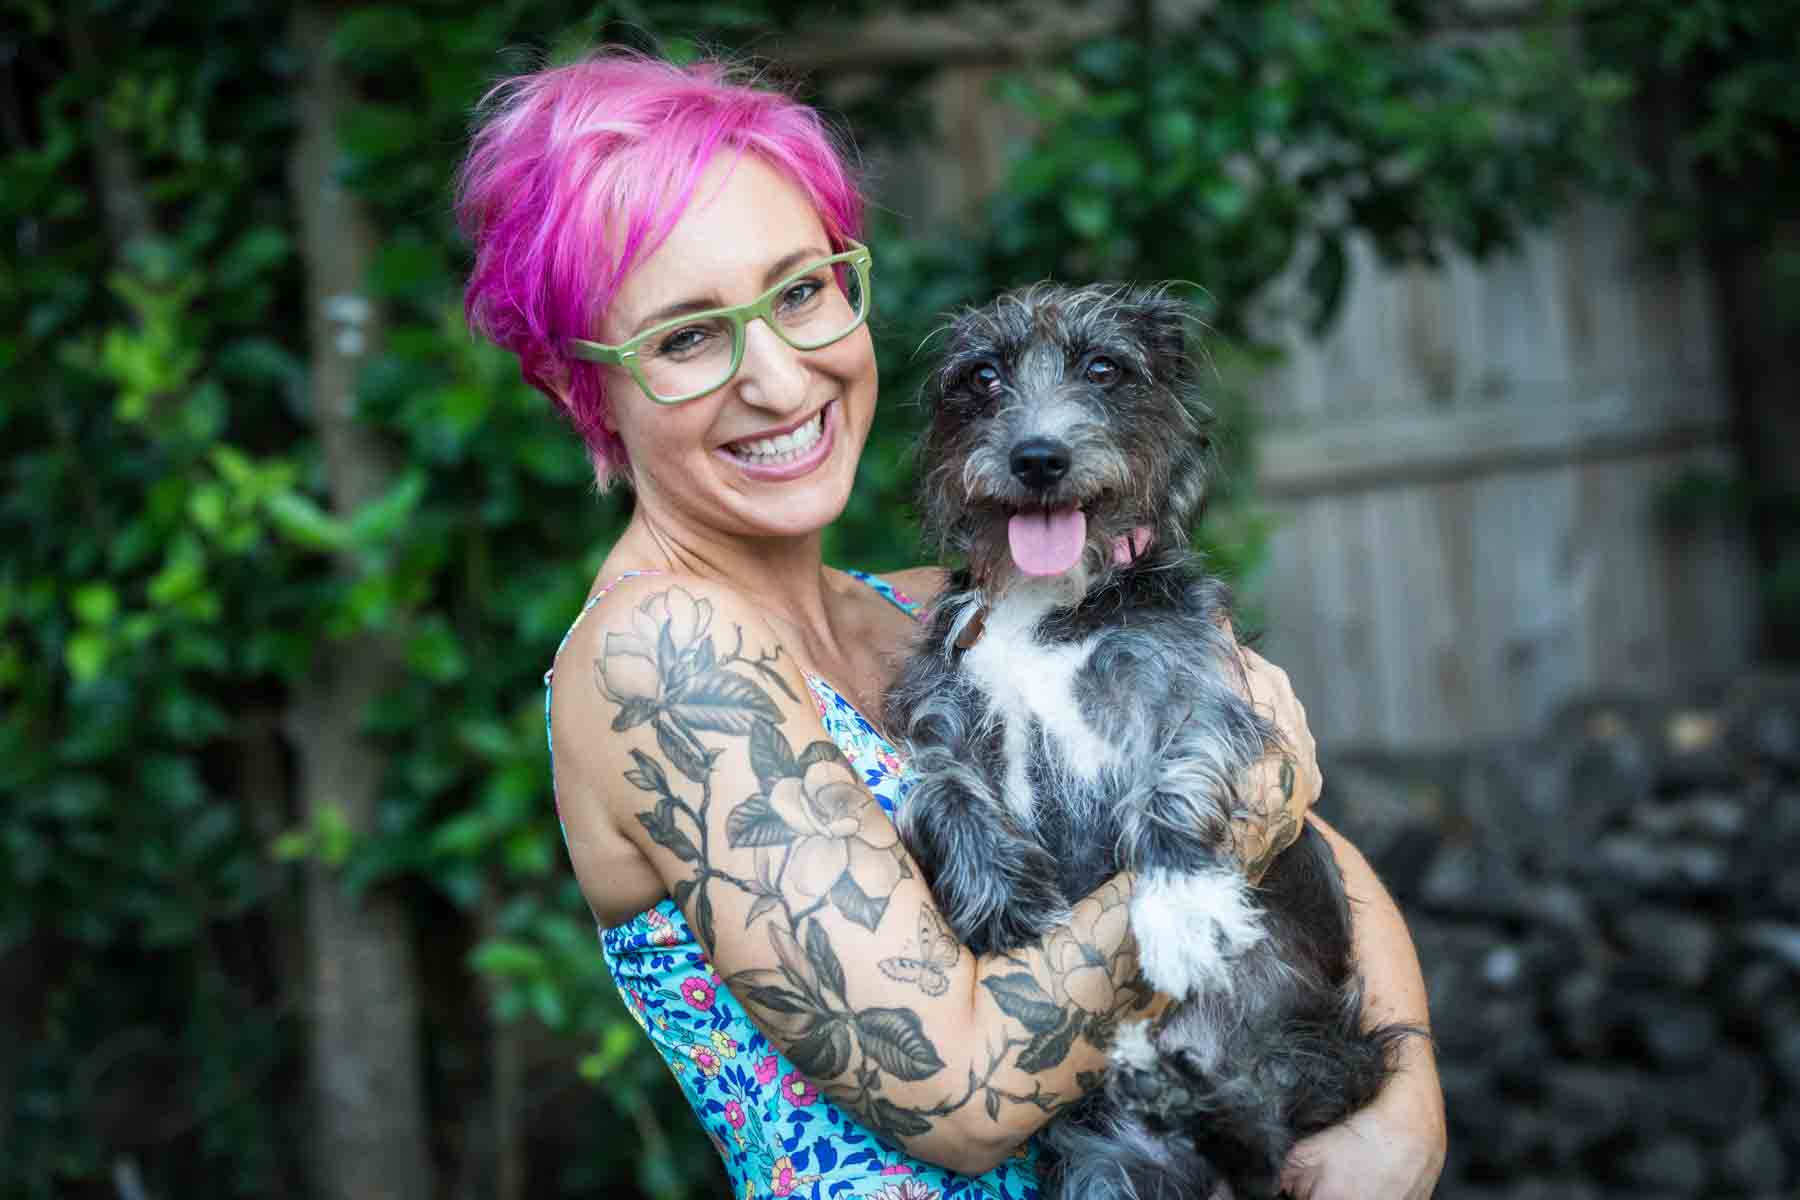 Woman with pink hair and glasses holding a grey dog for an article on pet photo tips